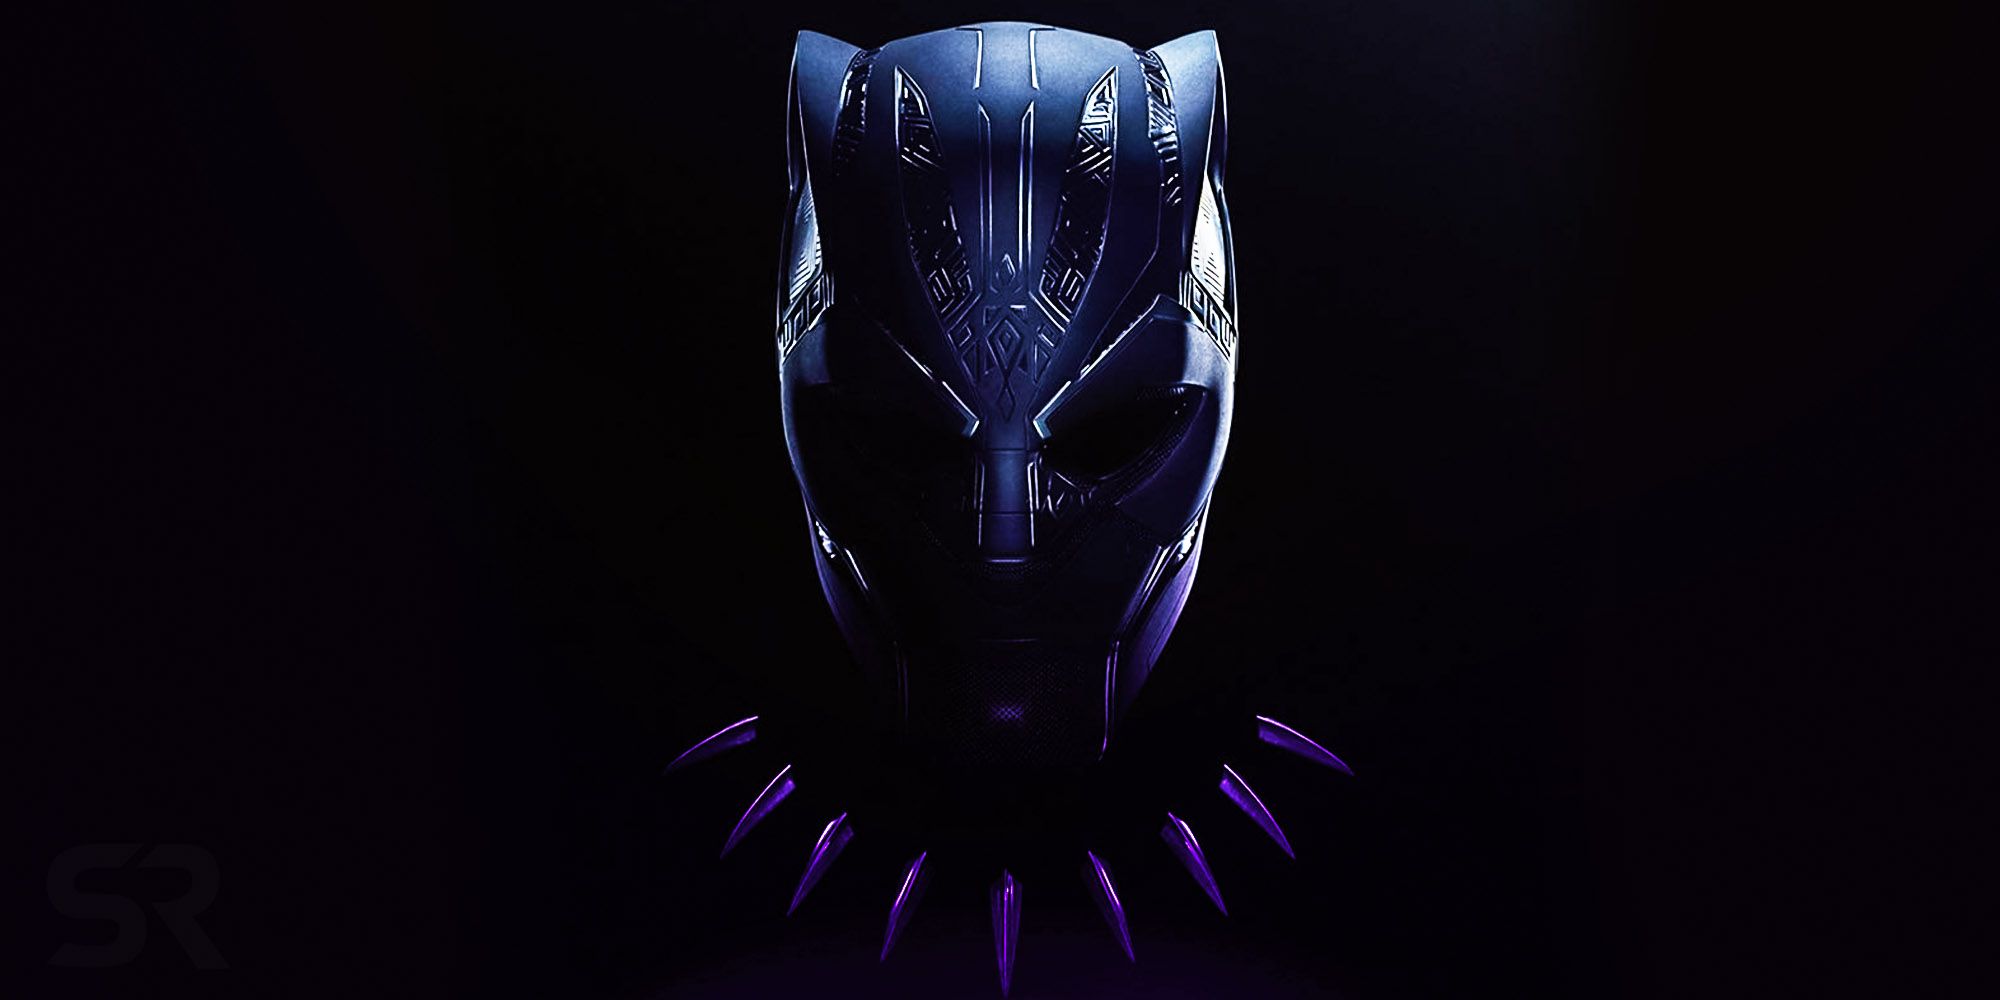 An image of the Black Panther mask